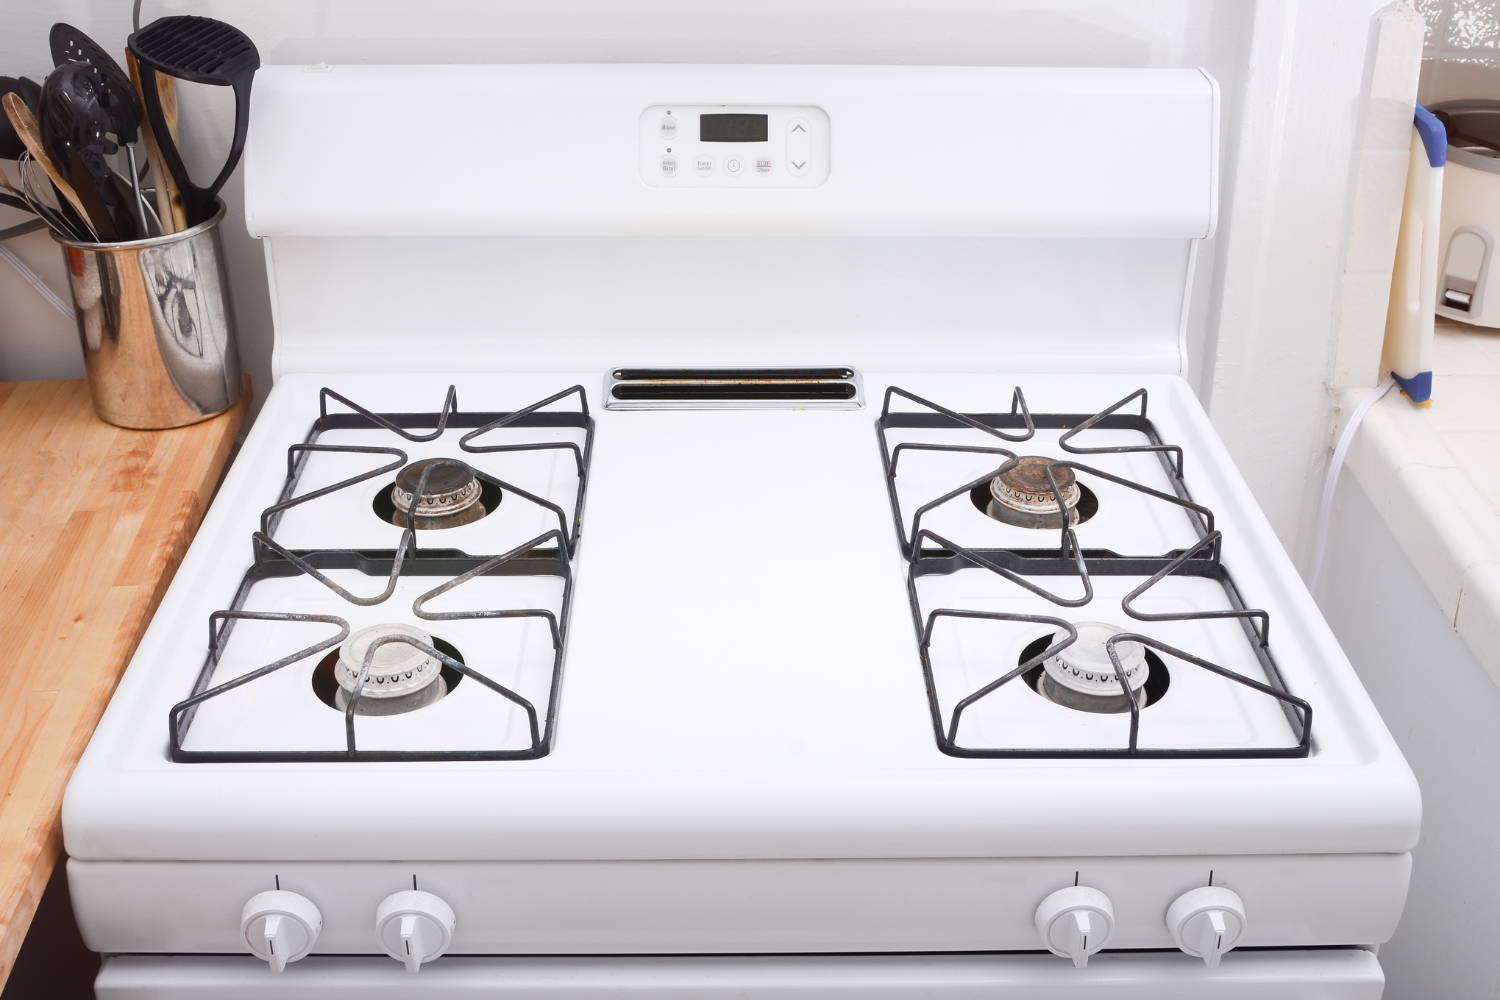 How to Clean Your Stovetop and Oven